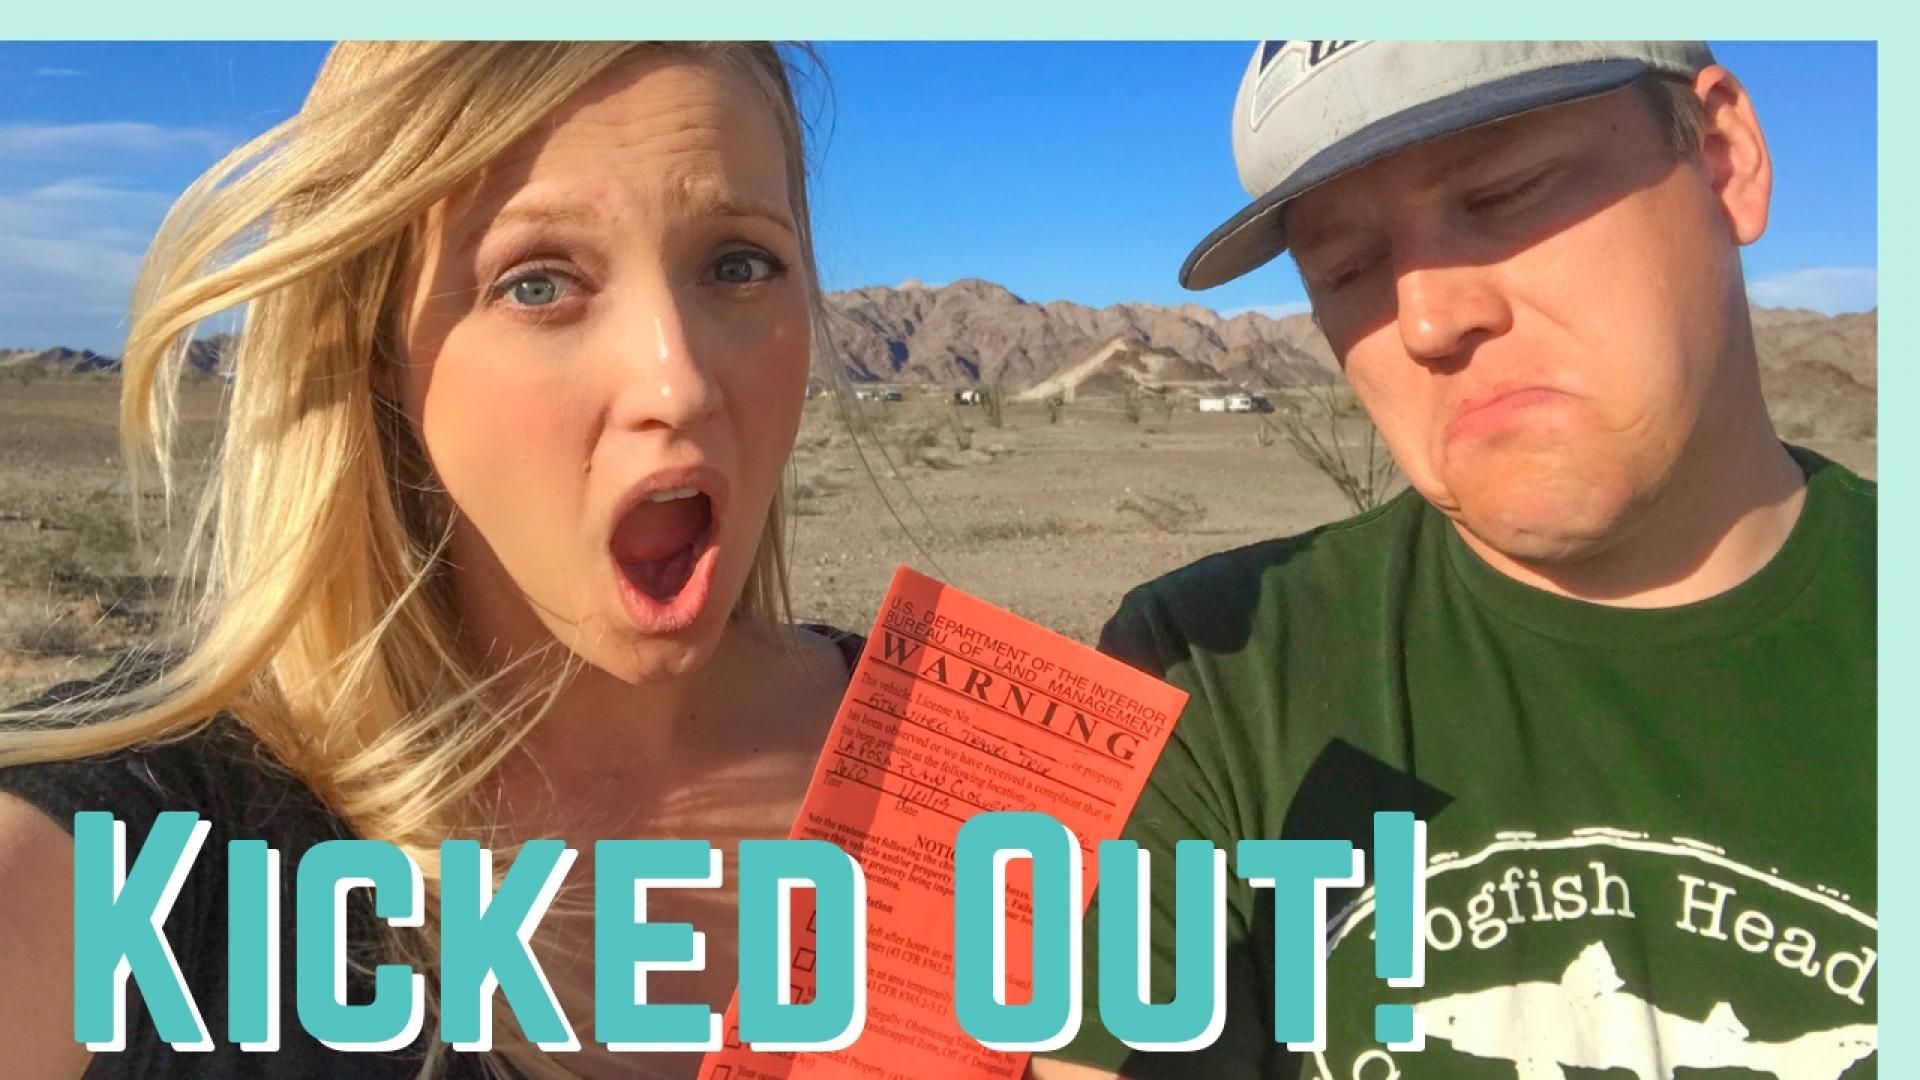 Kicked Out while Boondocking